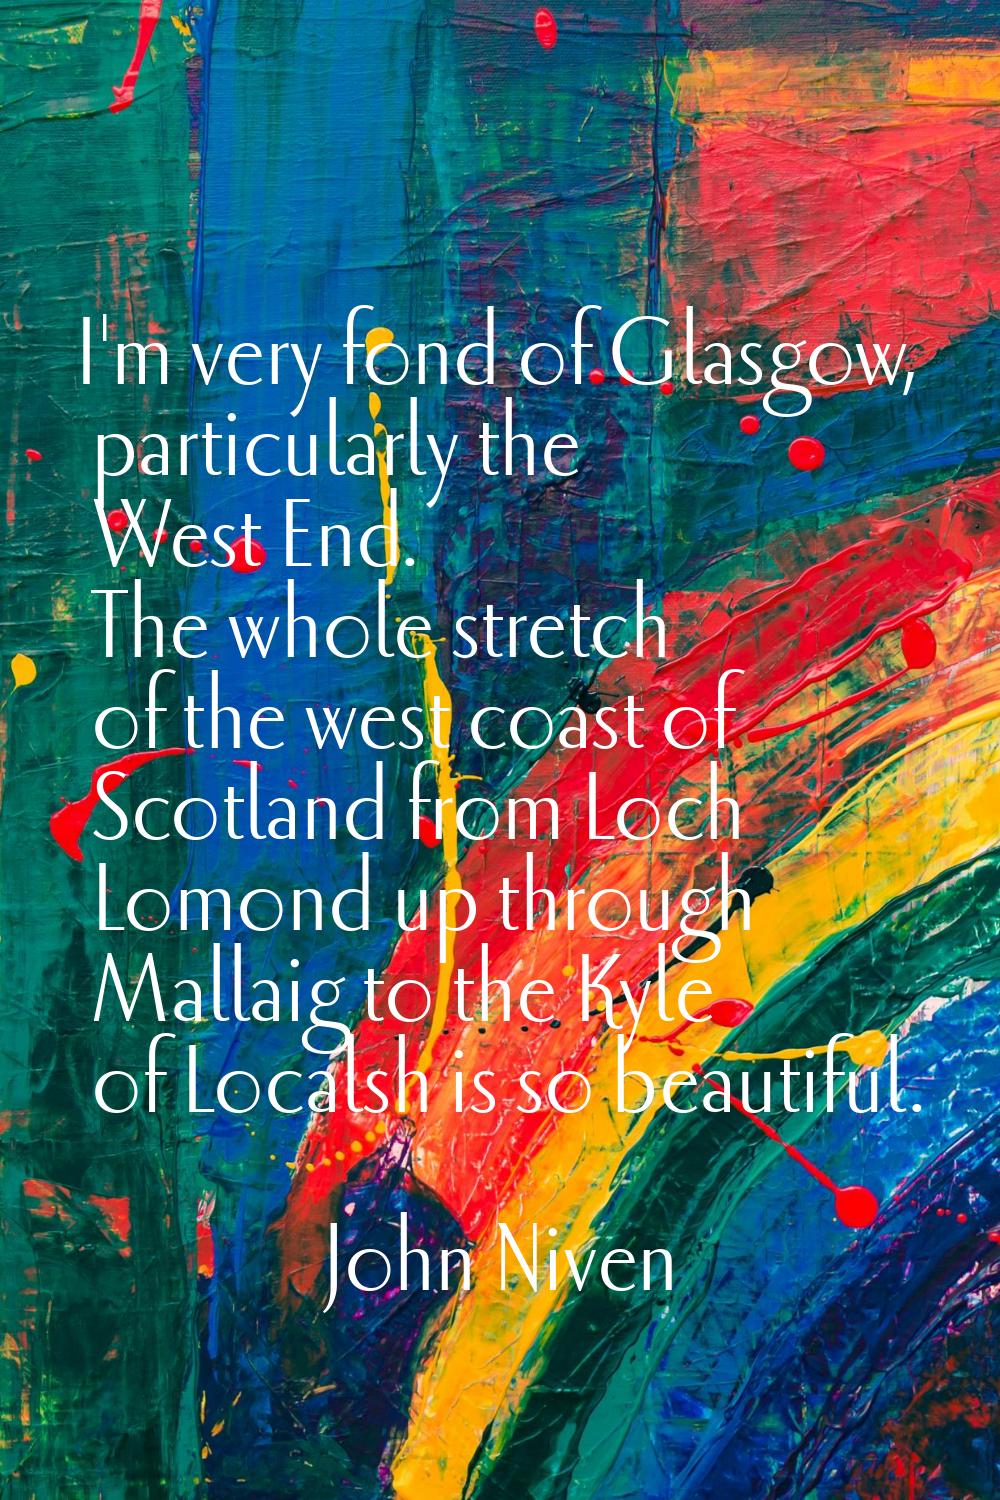 I'm very fond of Glasgow, particularly the West End. The whole stretch of the west coast of Scotlan